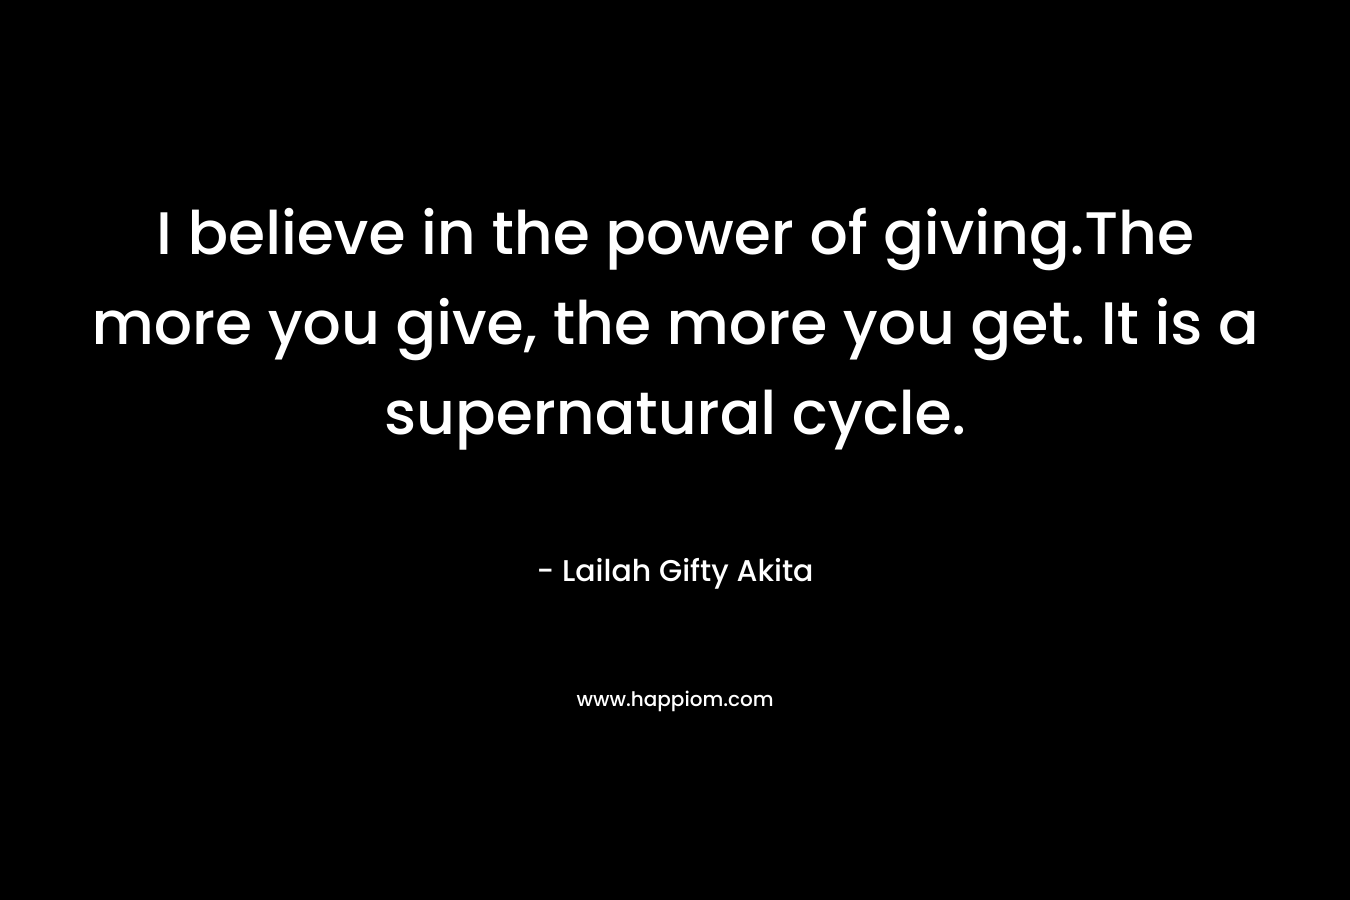 I believe in the power of giving.The more you give, the more you get. It is a supernatural cycle. – Lailah Gifty Akita